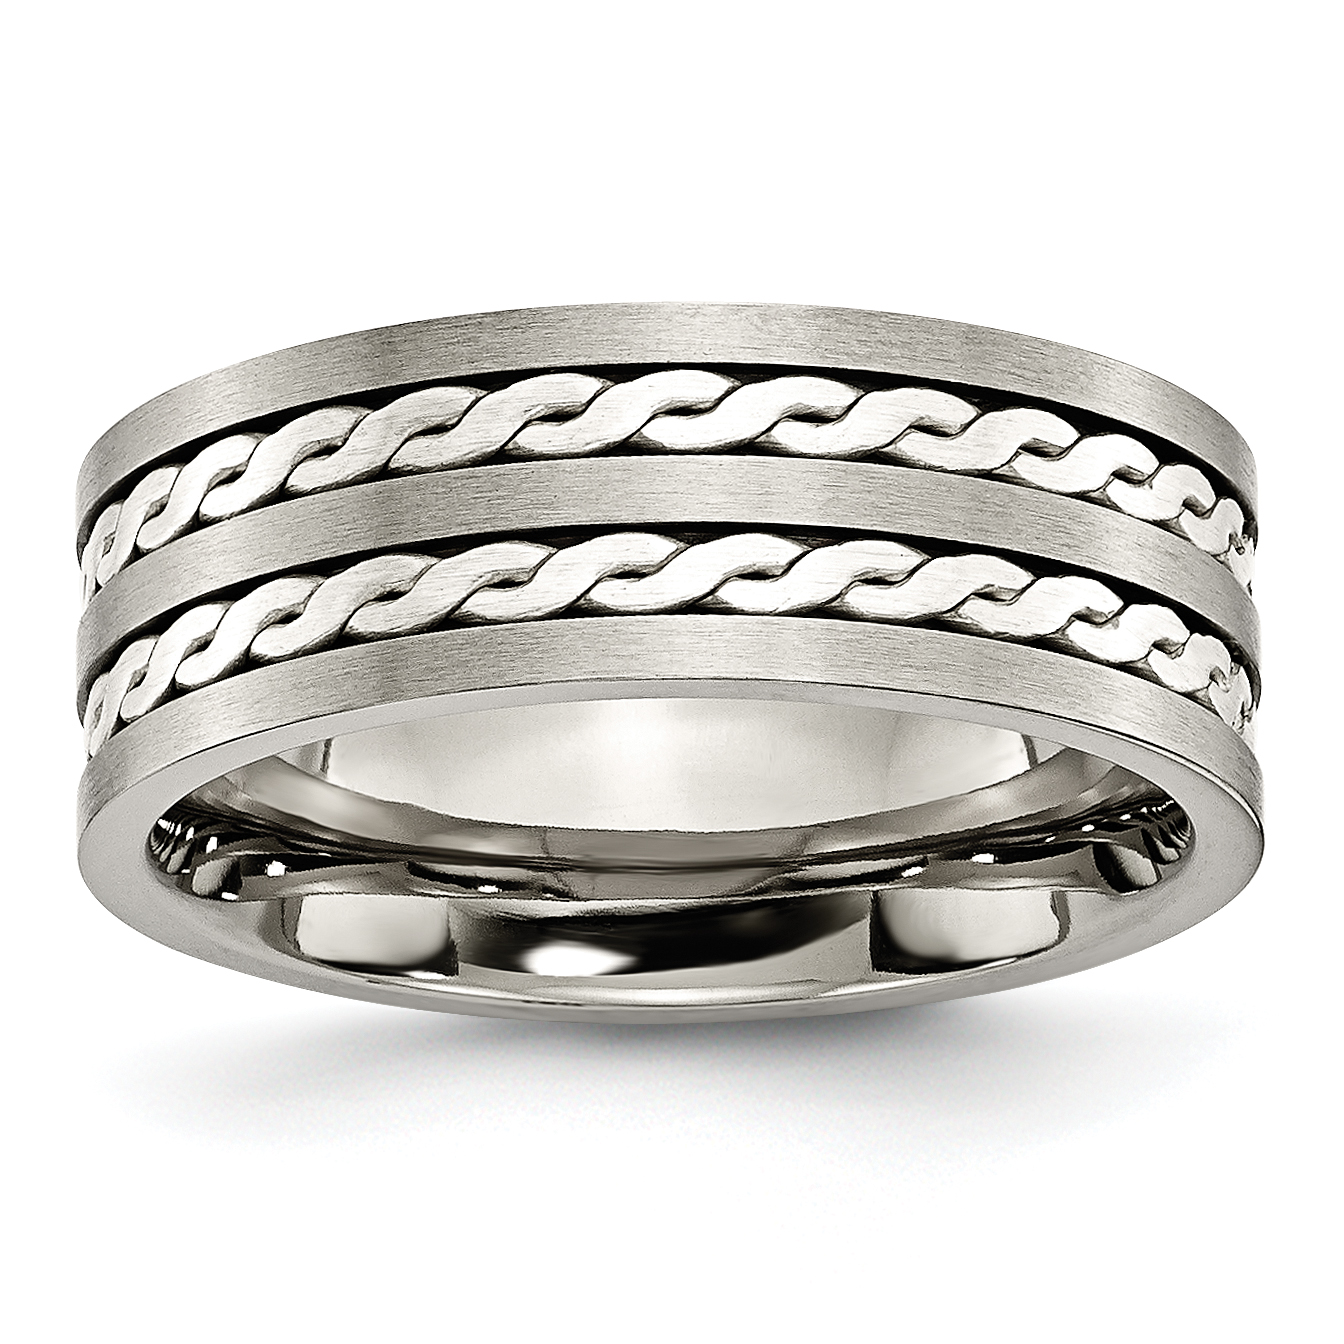 Bridal Titanium Sterling Silver Braided Inlay 8mm Brushed and Antiqued Band